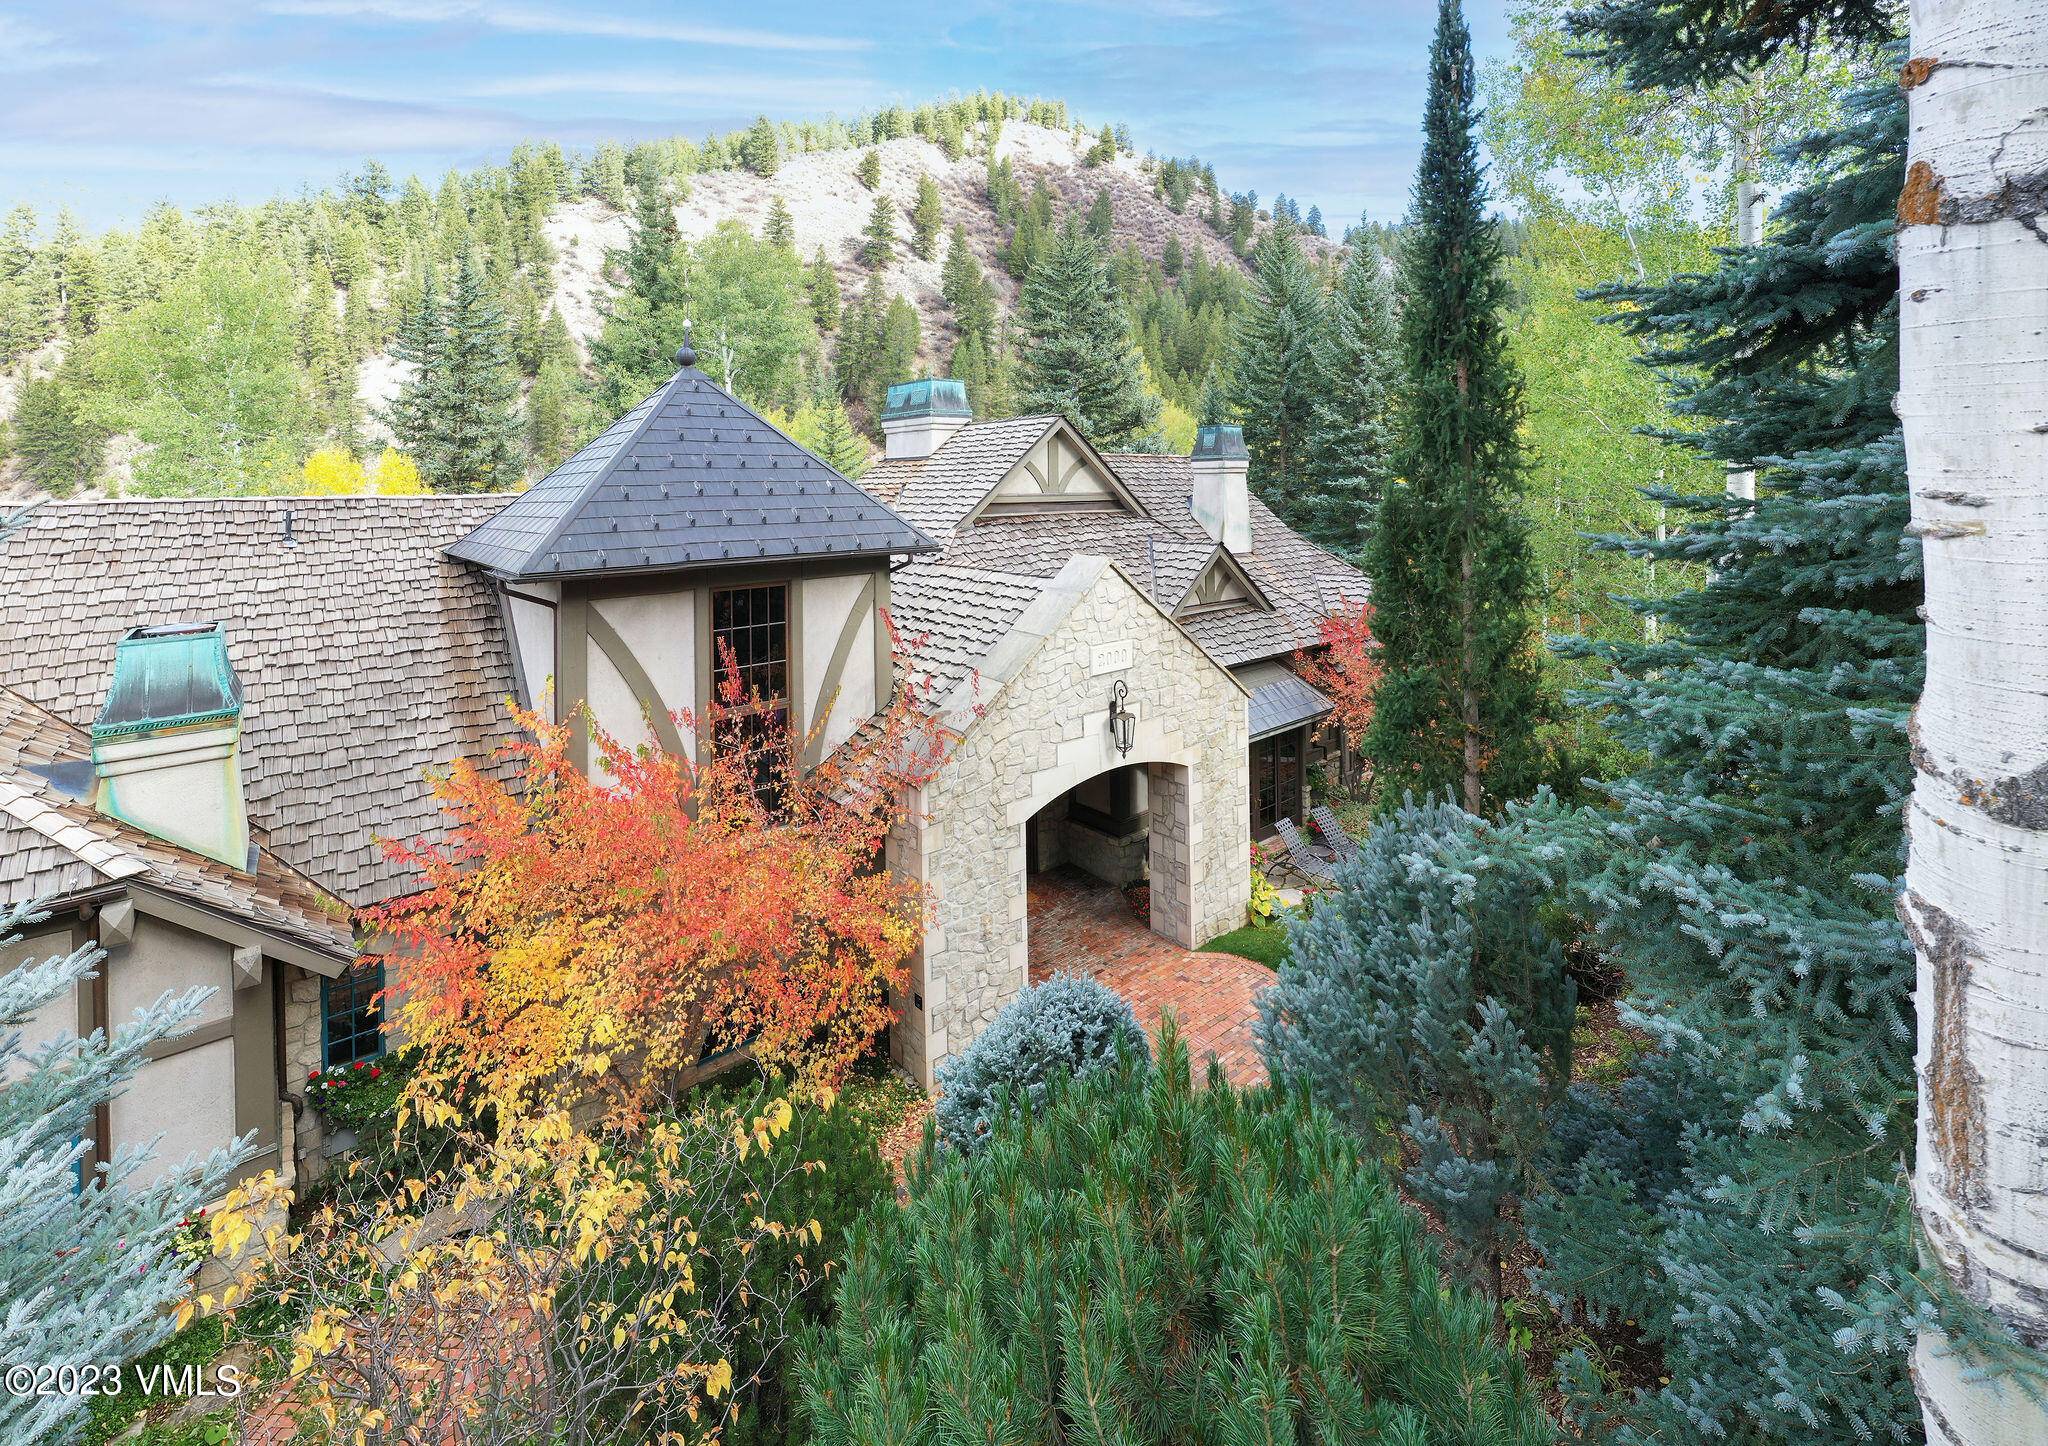 Magical water features, lush gardens, and a tranquil cul de sac location far from the noise impact of Village Road highlight this one of a kind, custom Beaver Creek estate.